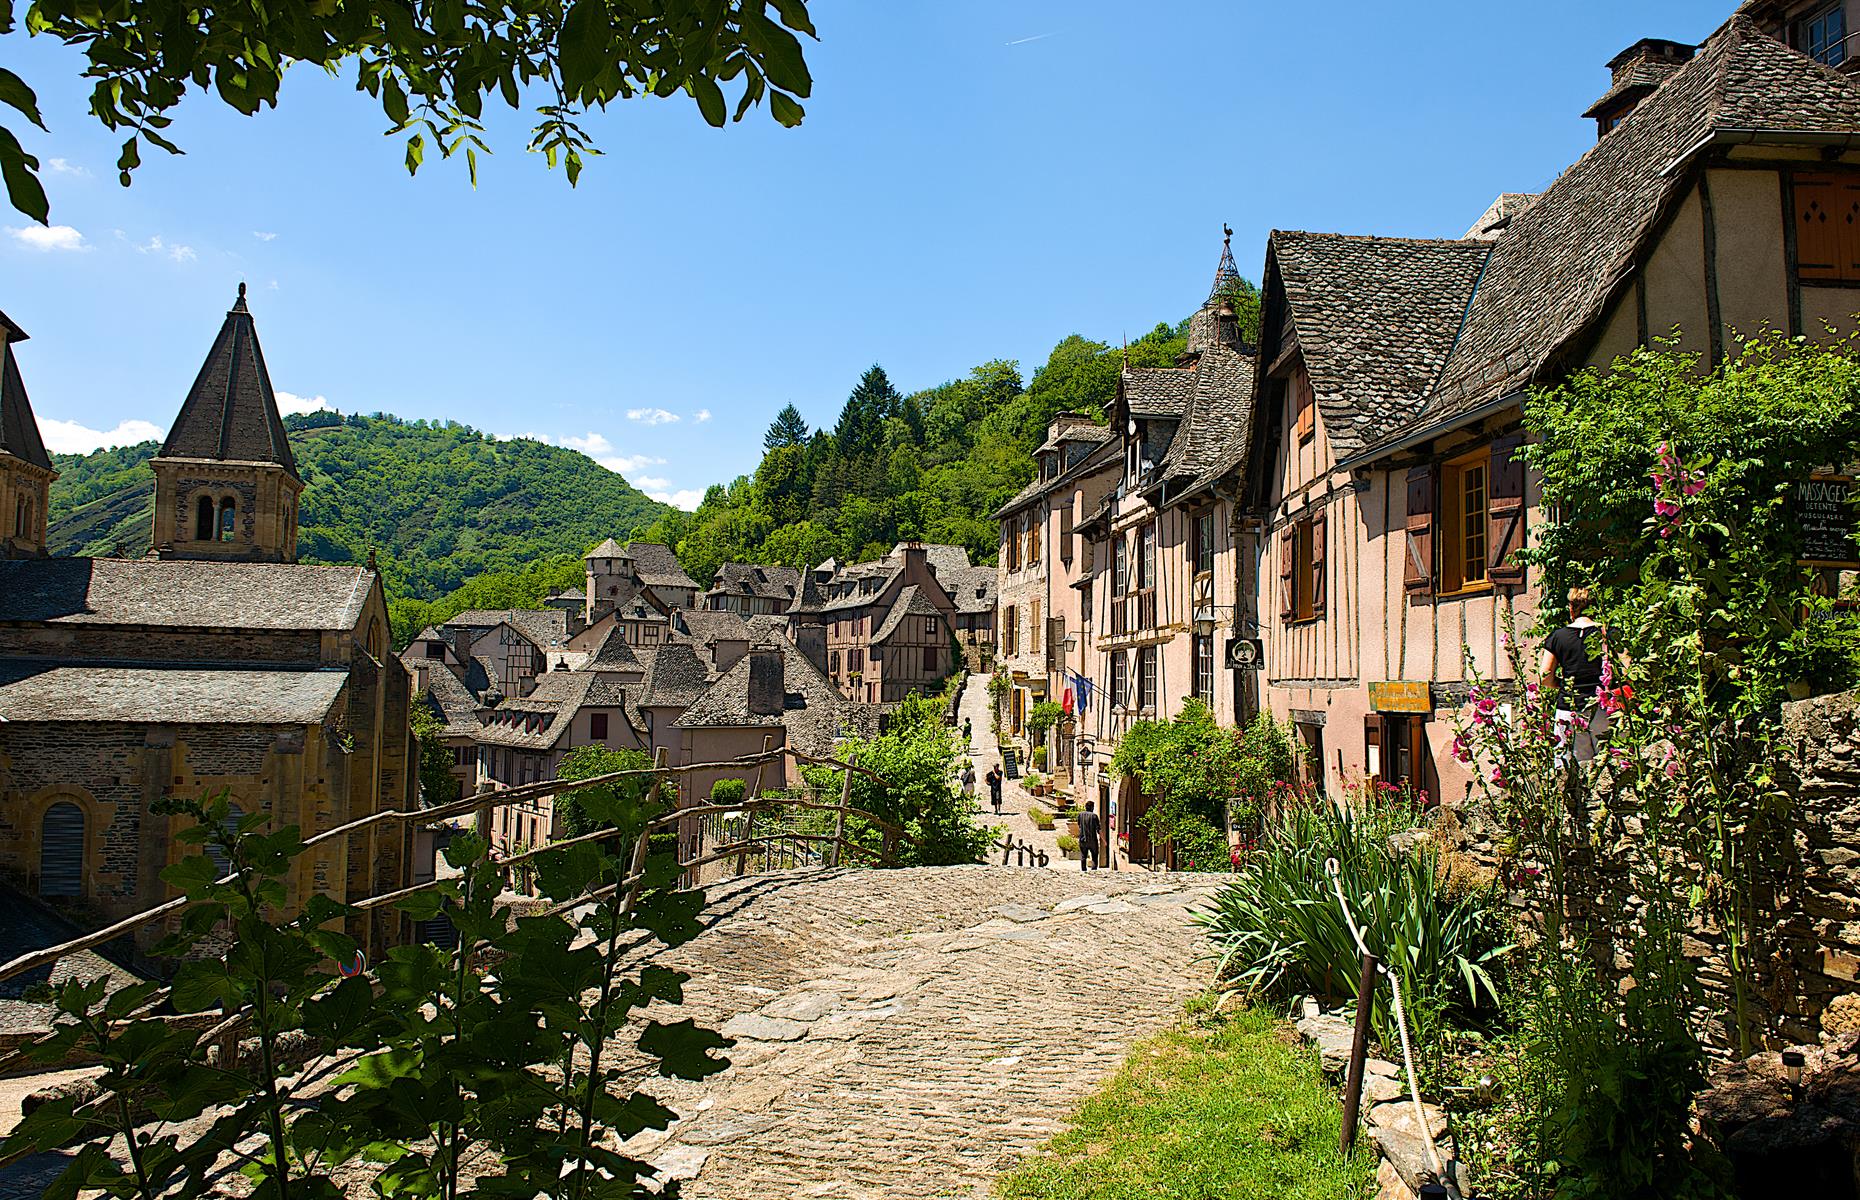 <p>Another of France’s postcard-perfect medieval villages inspired the filmmakers for Disney’s 2017 live-action remake of the iconic fairy tale, featuring Emma Watson. This time the production designer largely modelled the bookish heroine's village, the fictional Villeneuve, on Conques after scouting out the location. With tight cobbled streets, fountains and wonky timbered houses complete with wooden shutters and windowsills festooned in flowers, this sleepy village in the south of France is everything you could want as the home of a Disney heroine.</p>